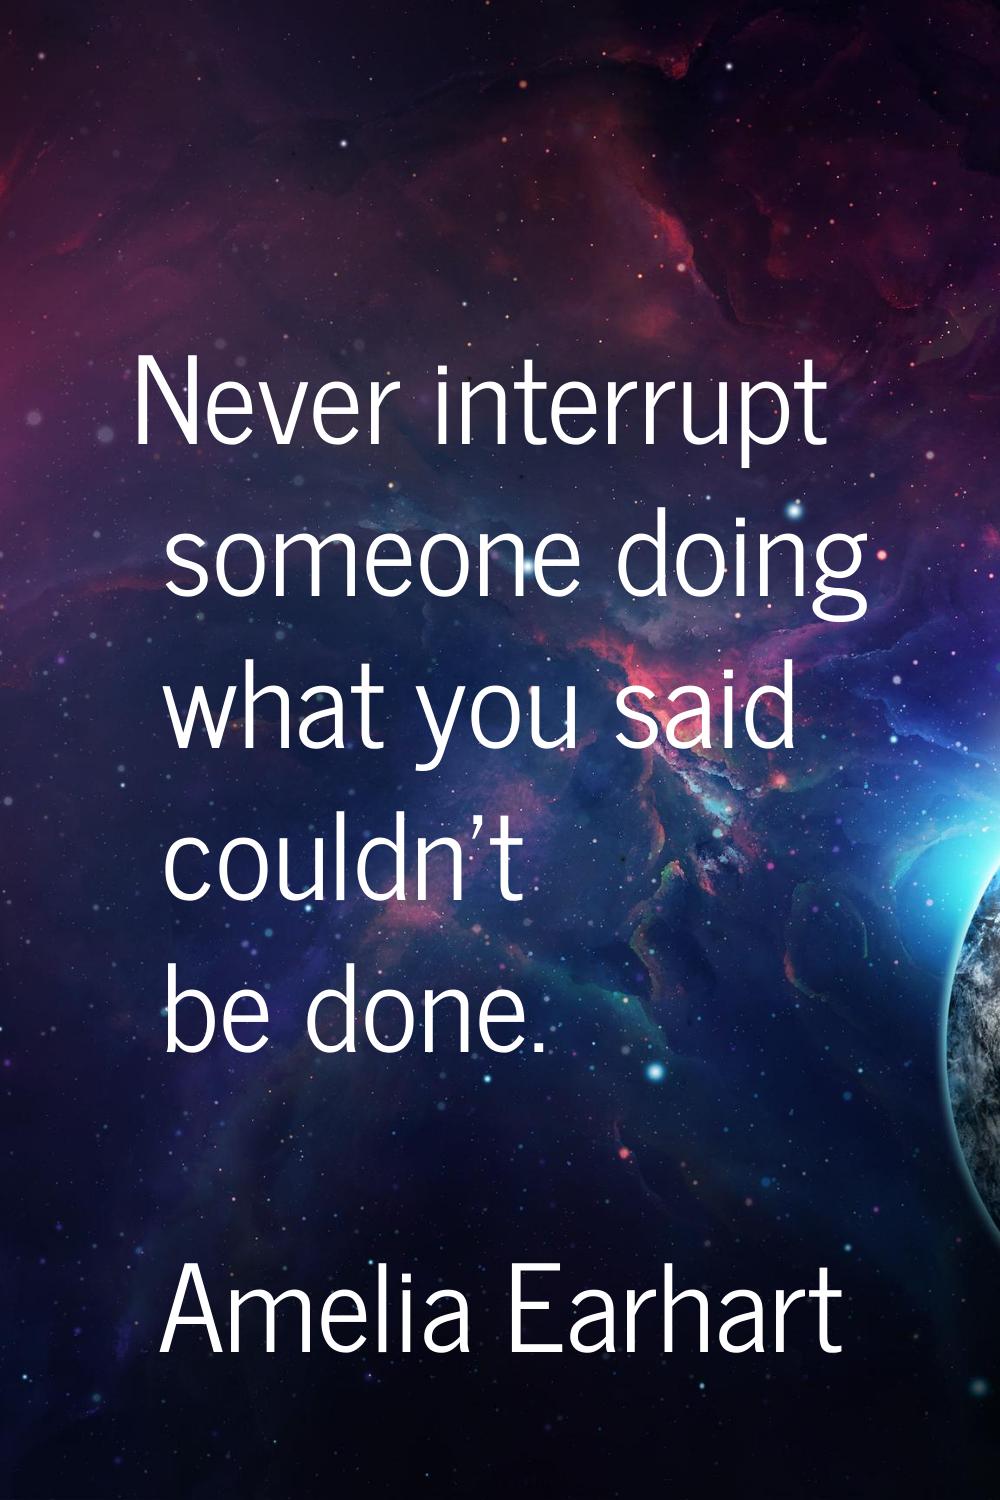 Never interrupt someone doing what you said couldn't be done.